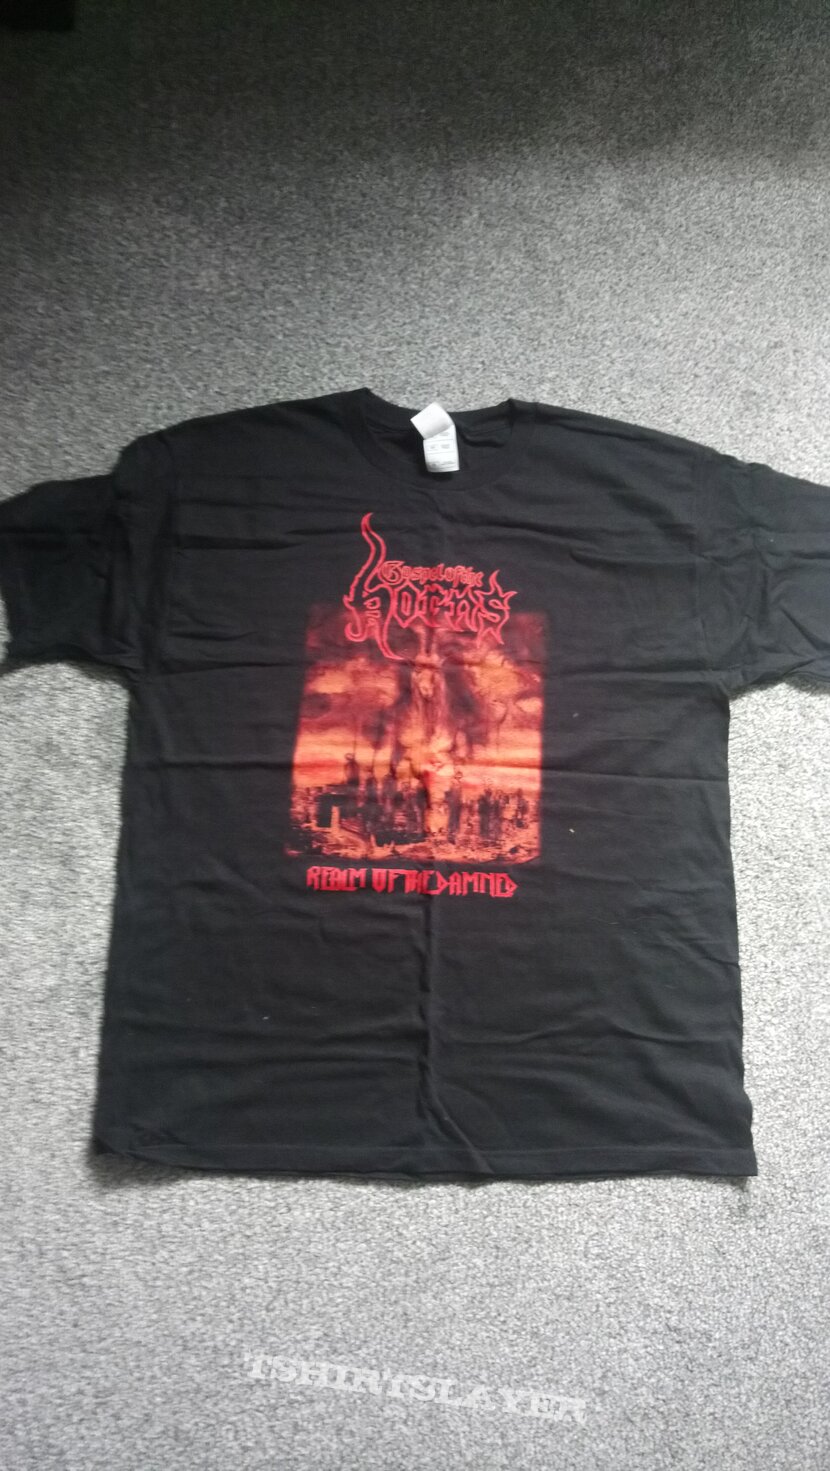 Gospel of the Horns - Realm of the Damned TS